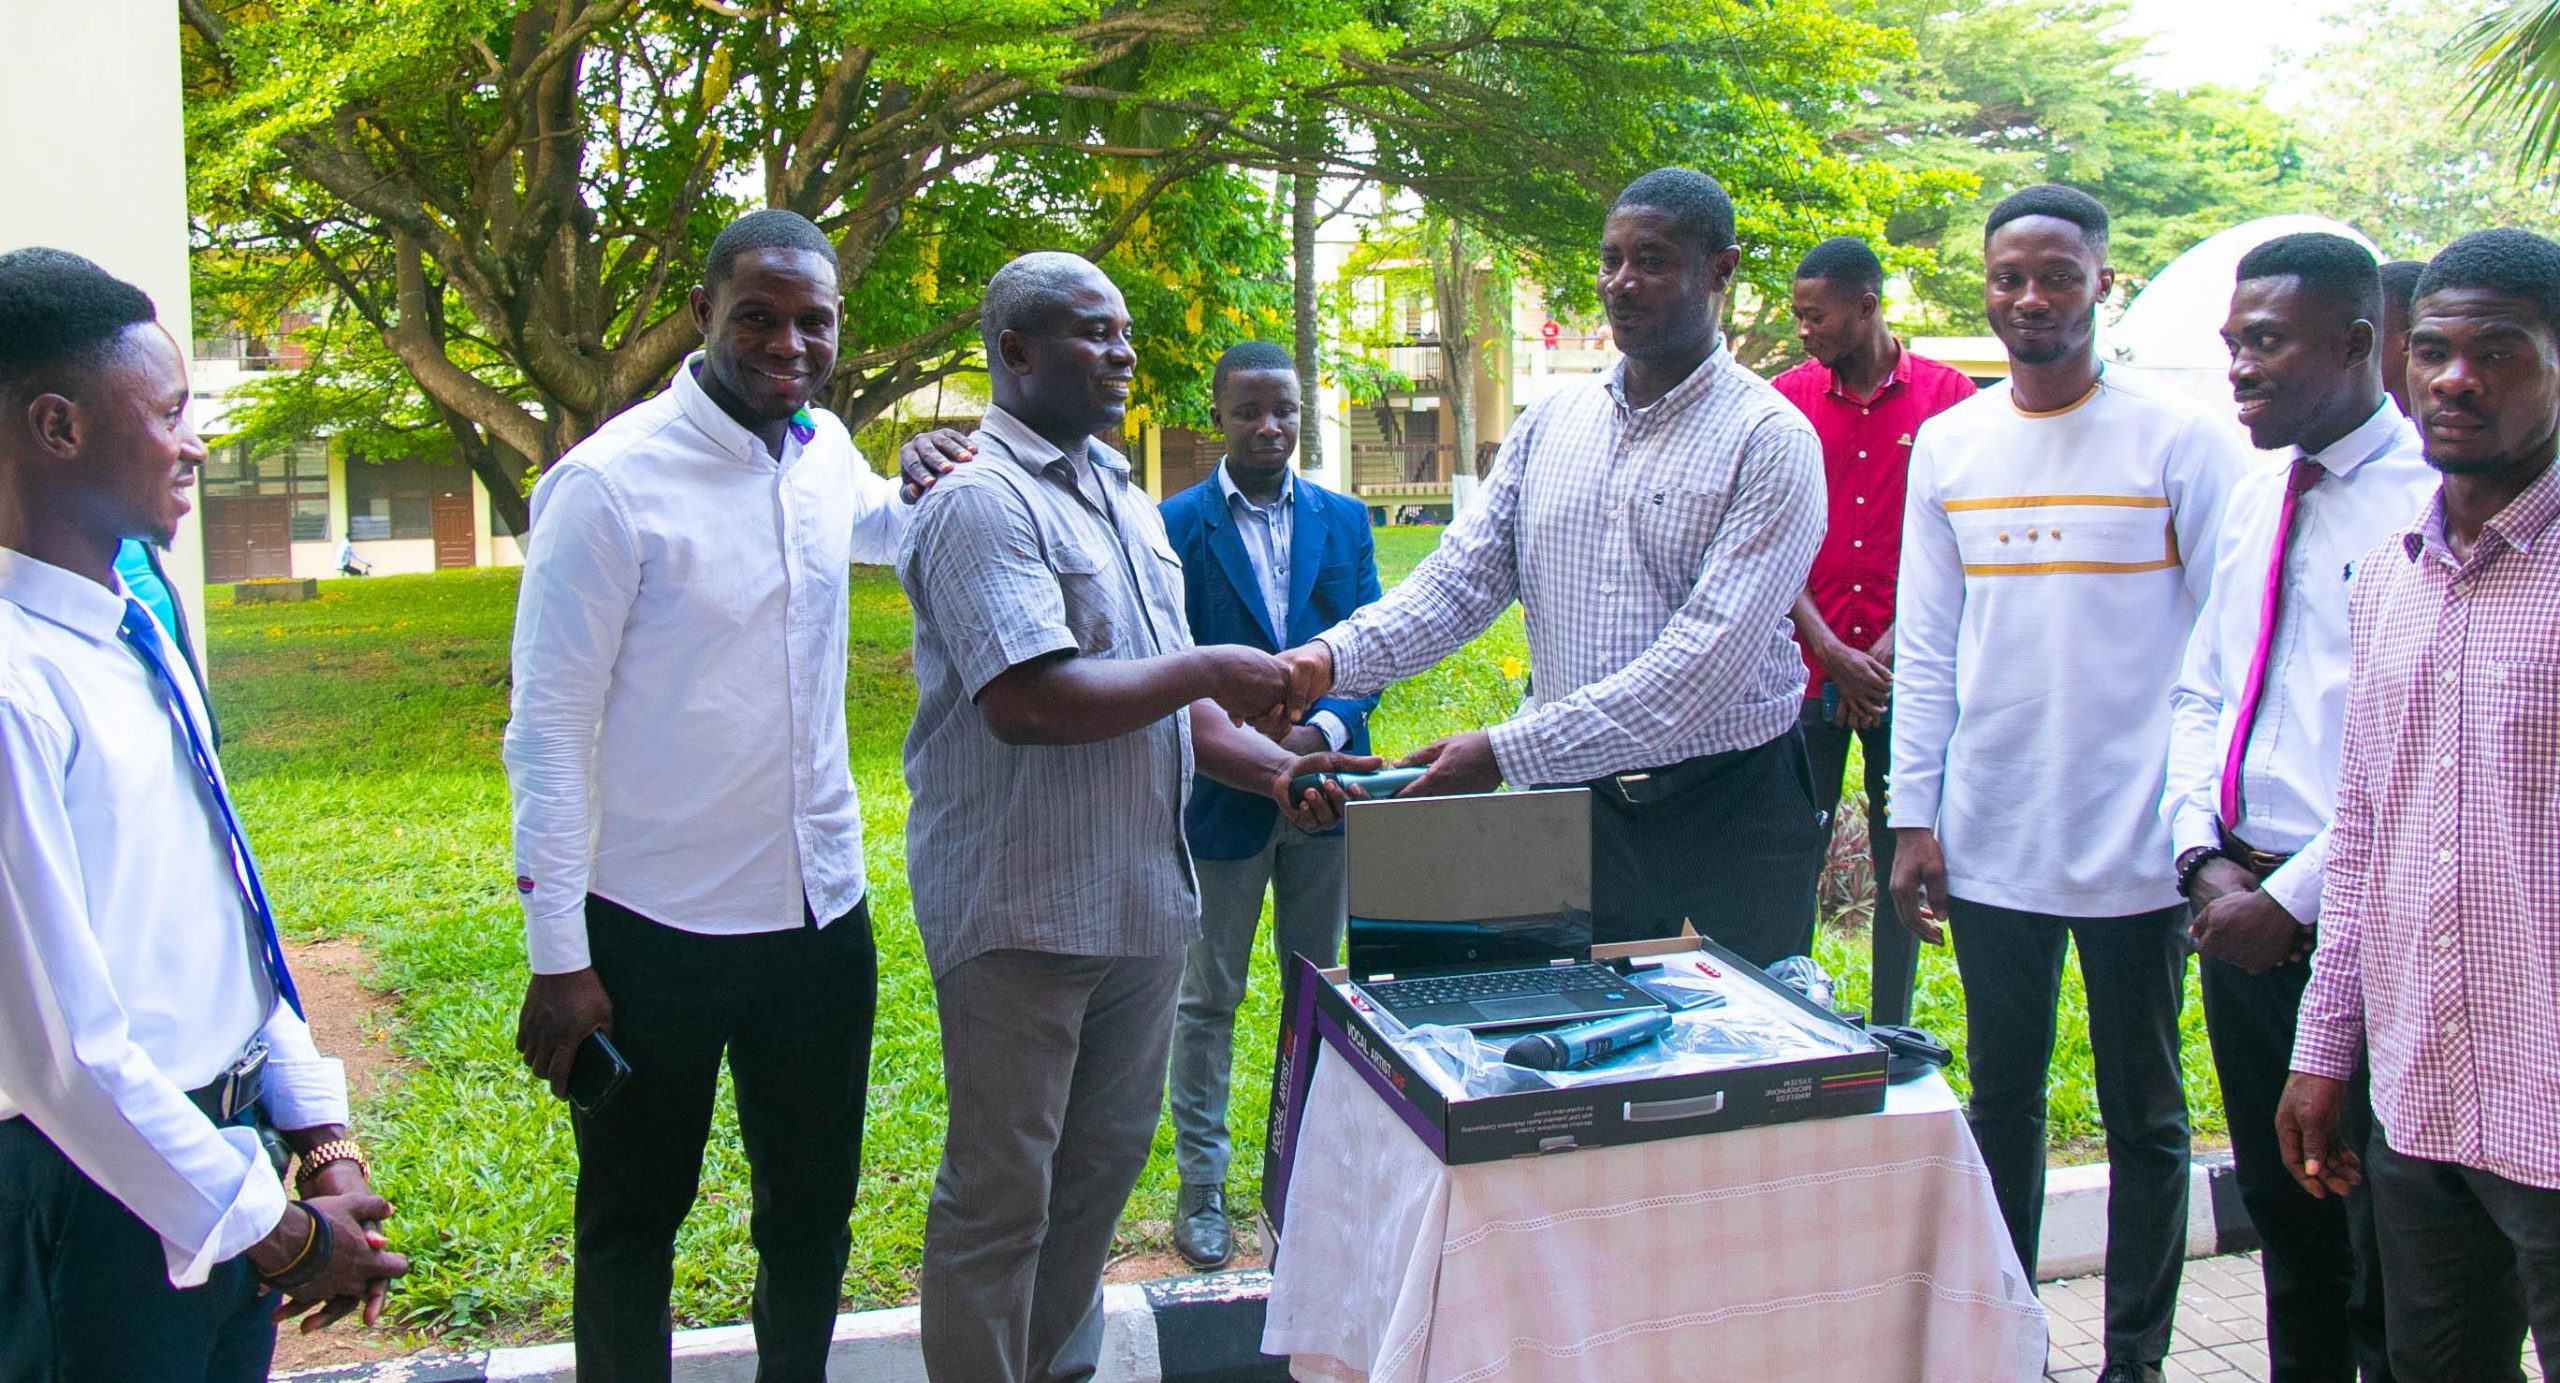 The Director of Public Affairs(DPA) Mr. M. K. Twum-Ampomah ( fourth right) given out the gagdets to the Manager of MYND FM, Mr. Richmond Butler